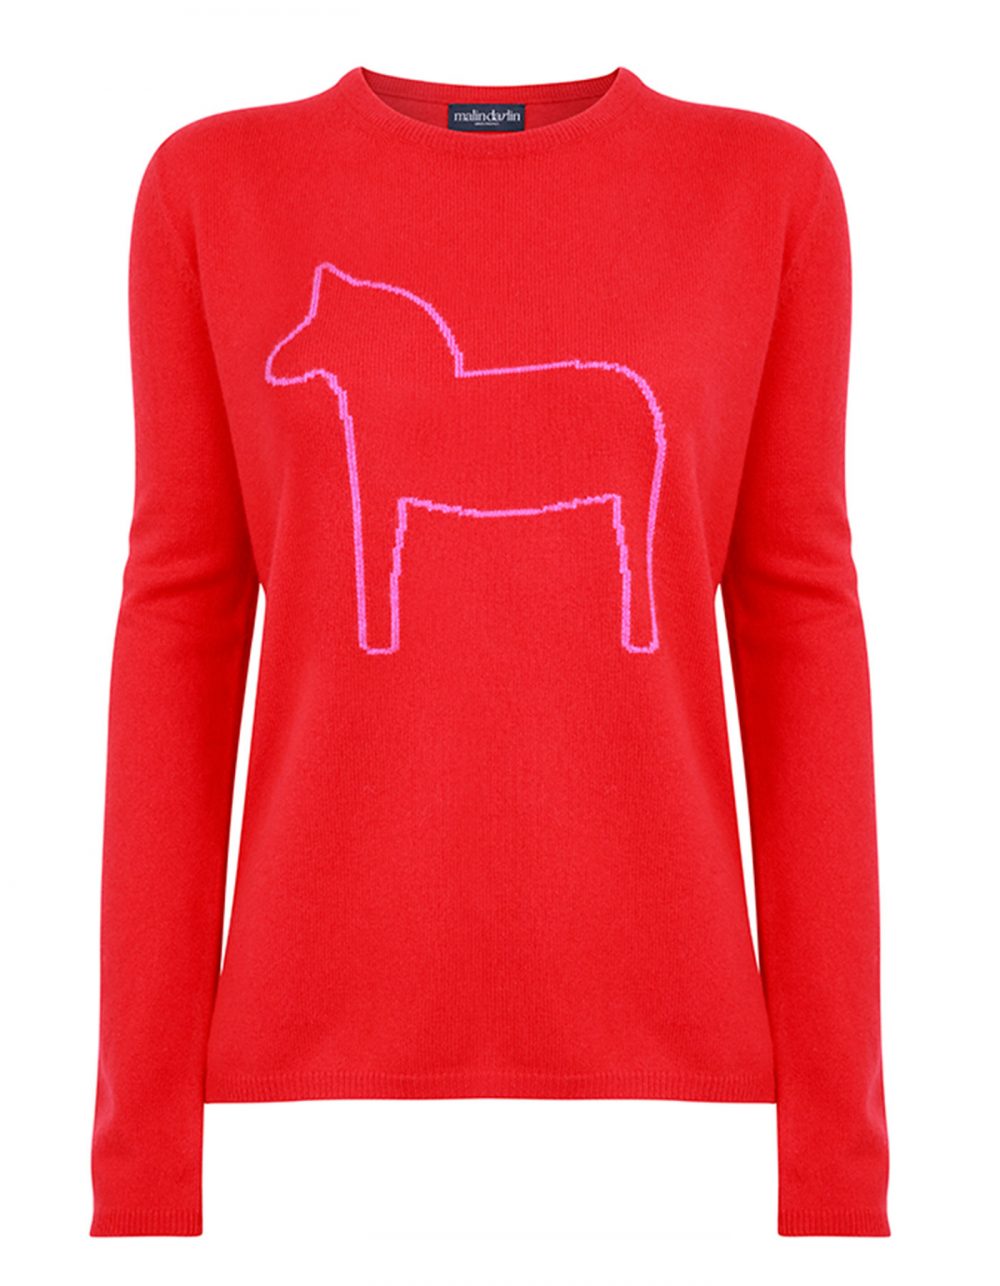 Photograph of malin darlin Dalahast horse cashmere jumpers, a pony depicted on red cashmere, against a white background.